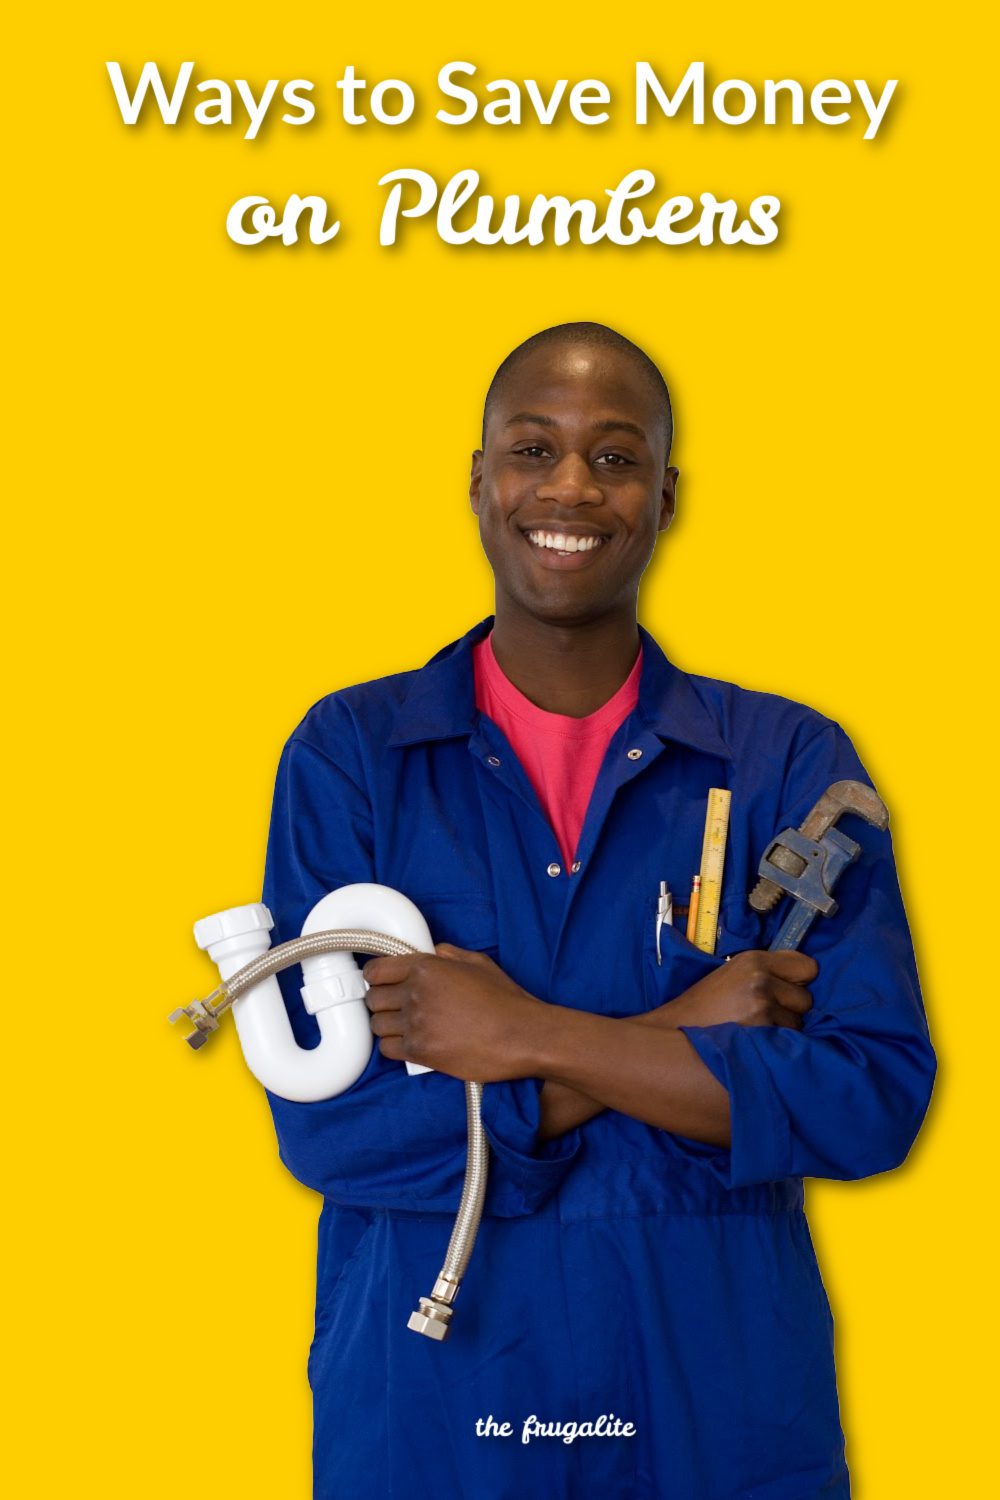 How to Save Money on Plumbers